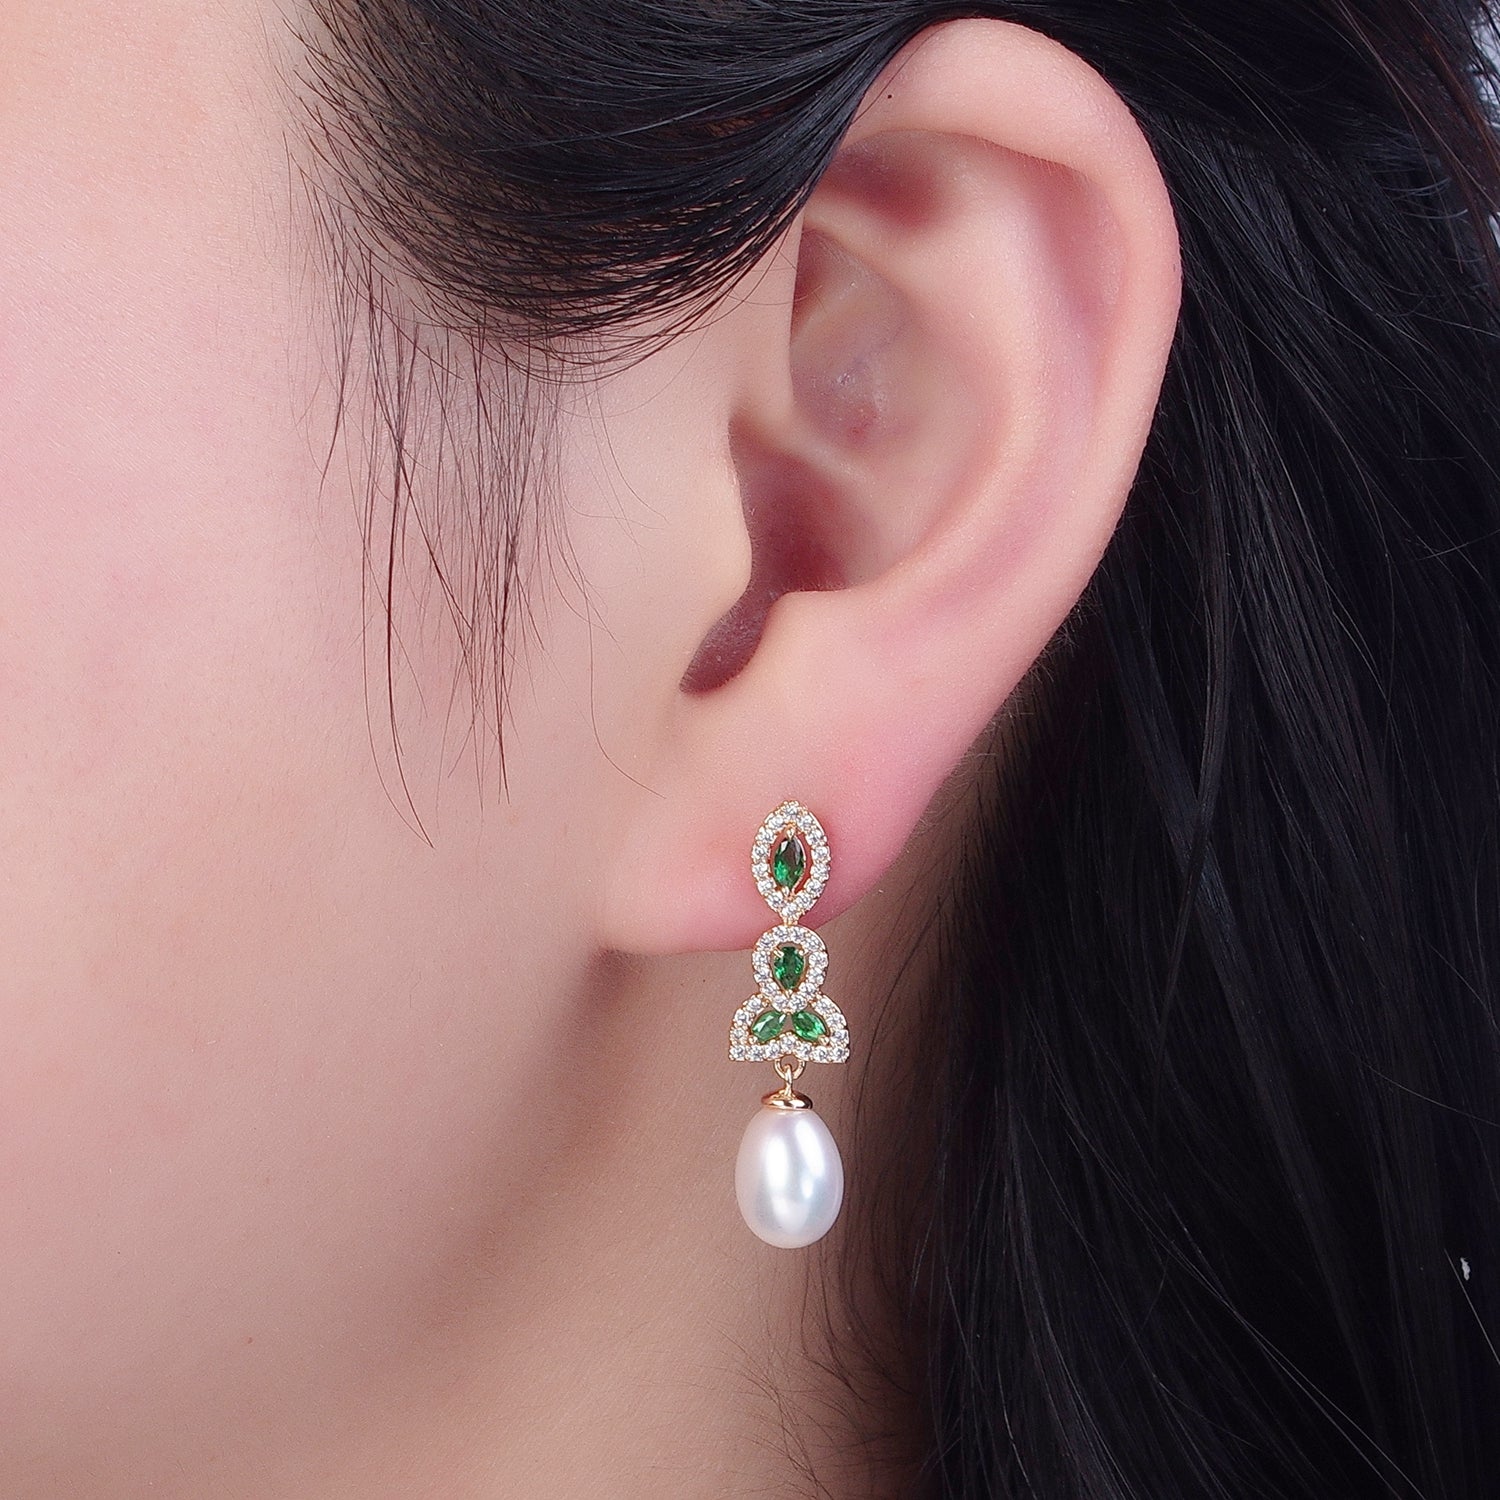 Dangle White Pearl Stud Earring with Gold Green Pave Flower for Wedding Jewelry T-532 - DLUXCA